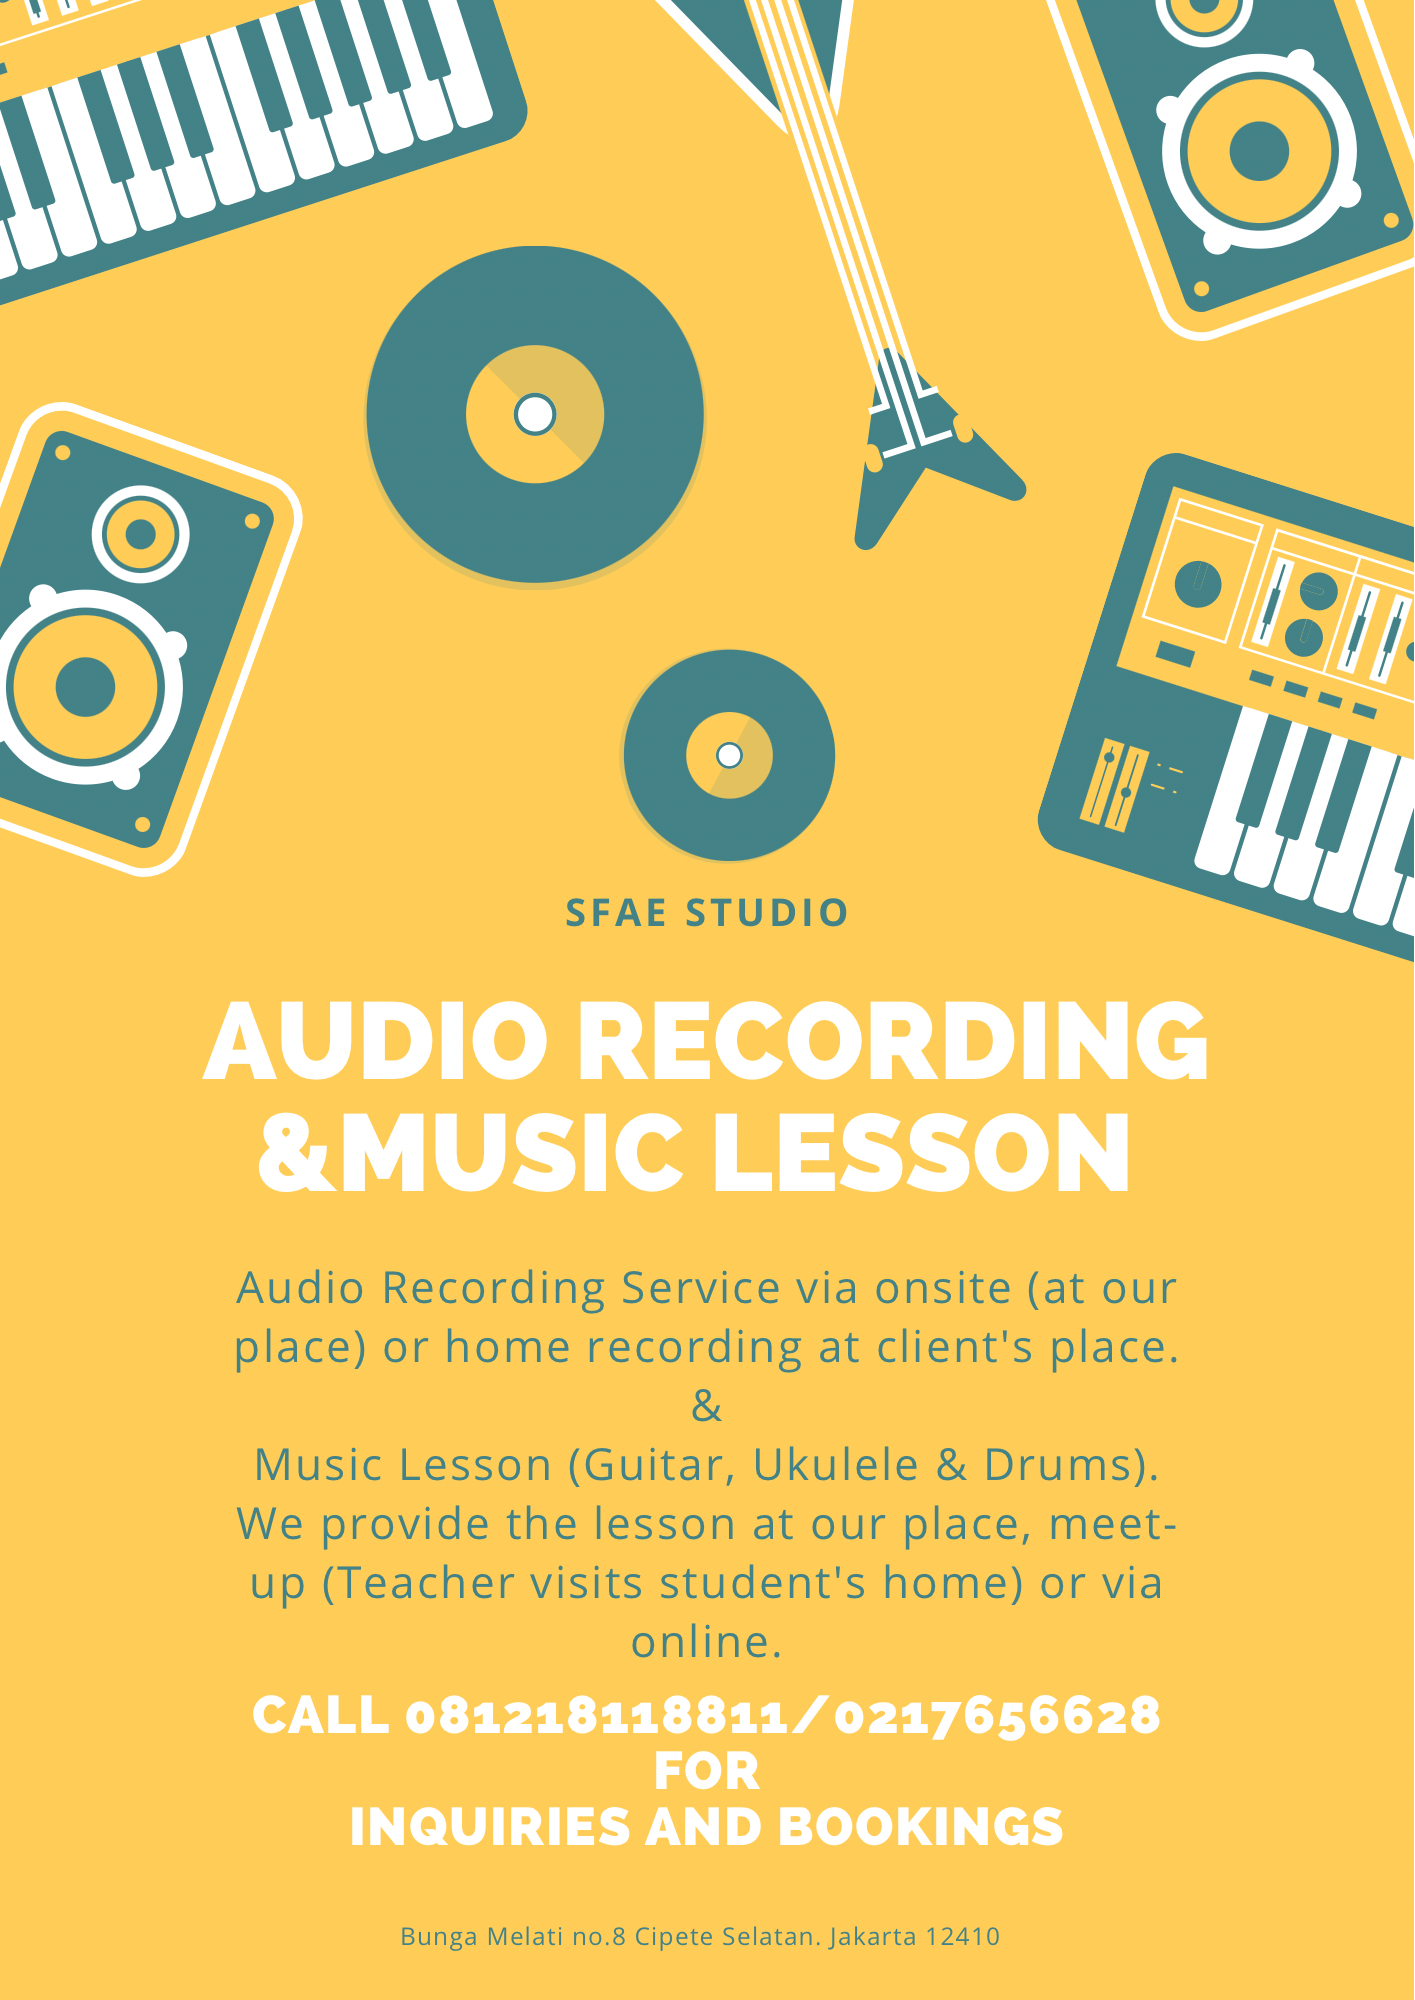 Details on our aduio and music lesson service